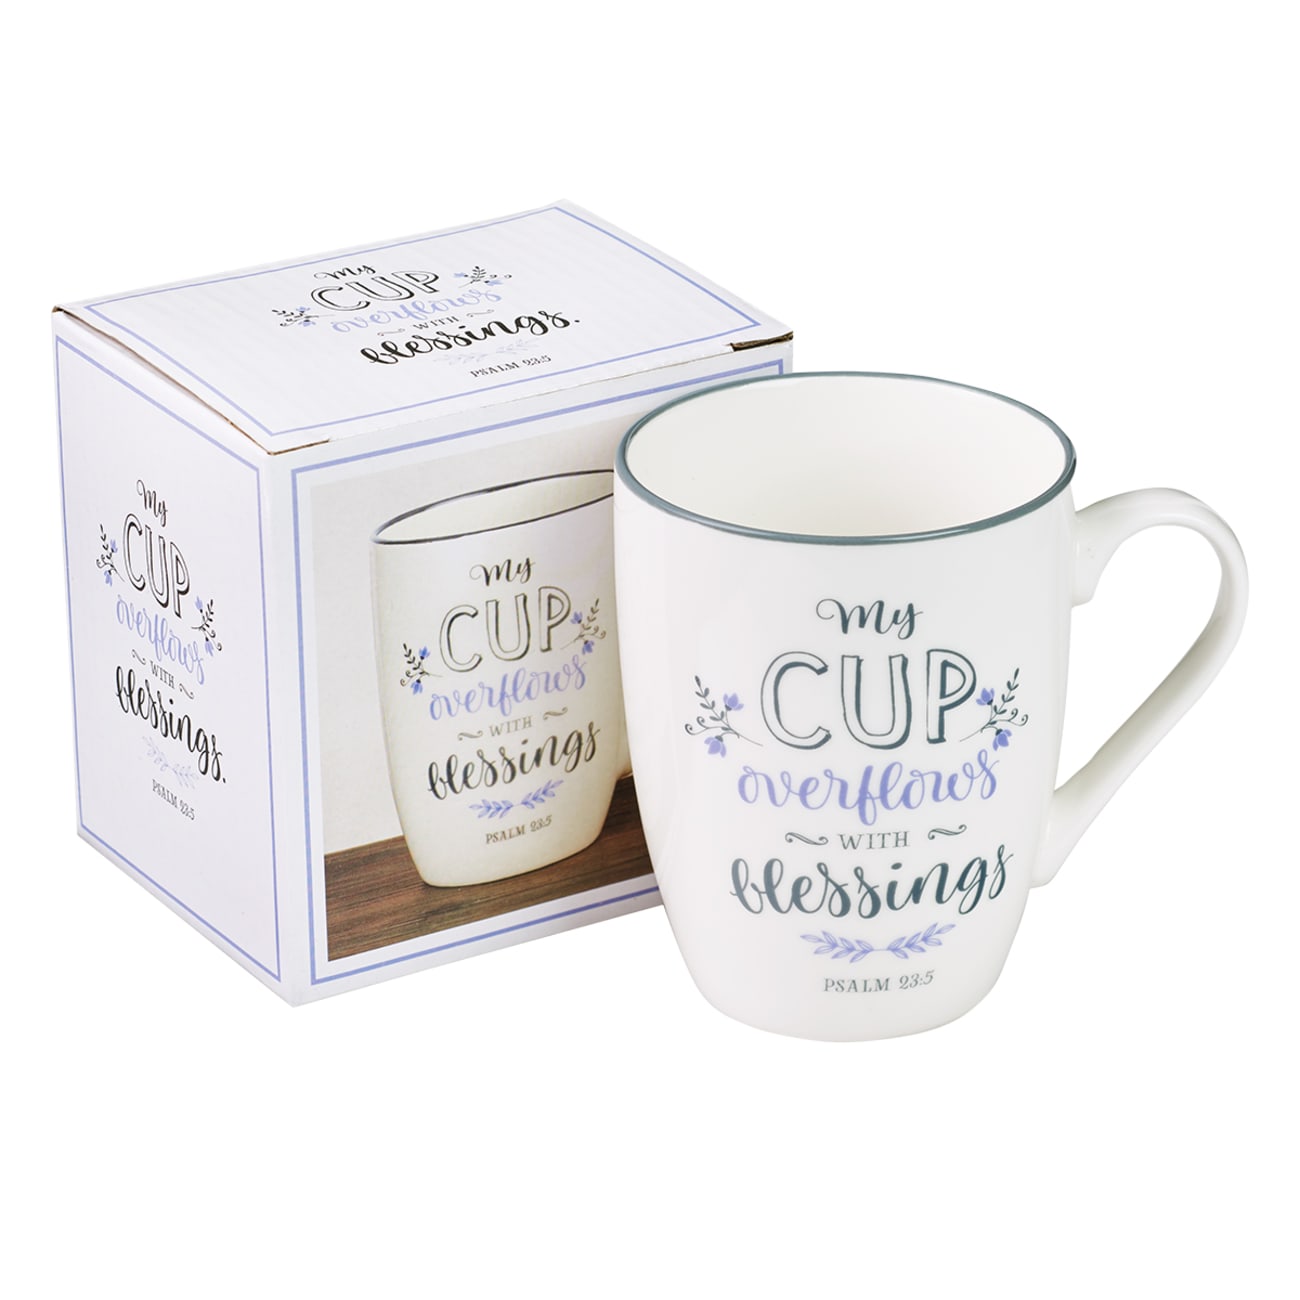 Ceramic Mug: My Cup Overflows With Blessings, White/Grey-Blue (Psalm 23:5) Homeware